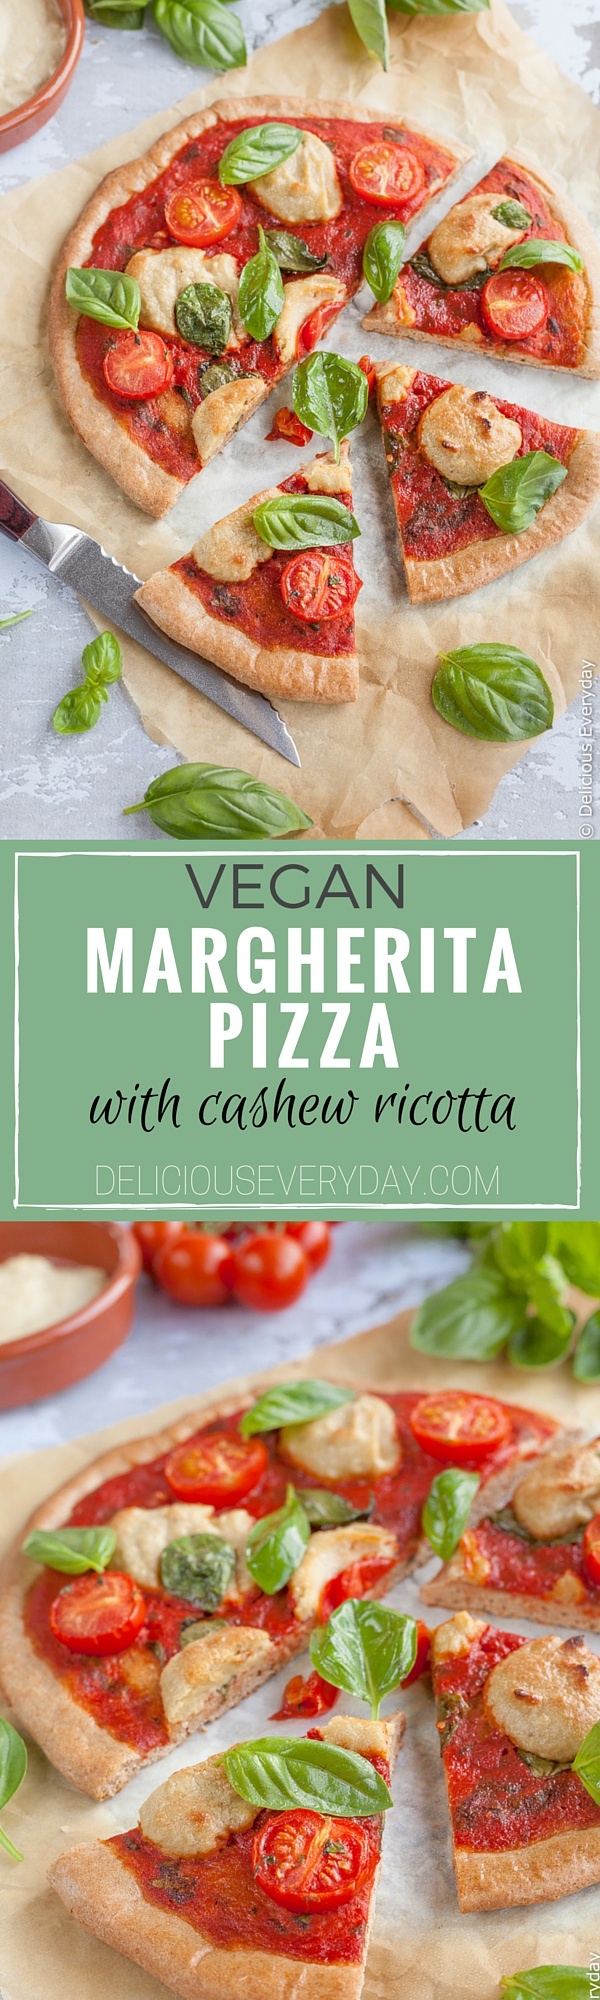 With this Vegan Pizza Recipe you can enjoy all the flavours of the Italian classic, the Margherita pizza. Topped with tomatoes and basil and a creamy cashew ricotta this cheeseless pizza is sure to be a hit! | Click for the recipe